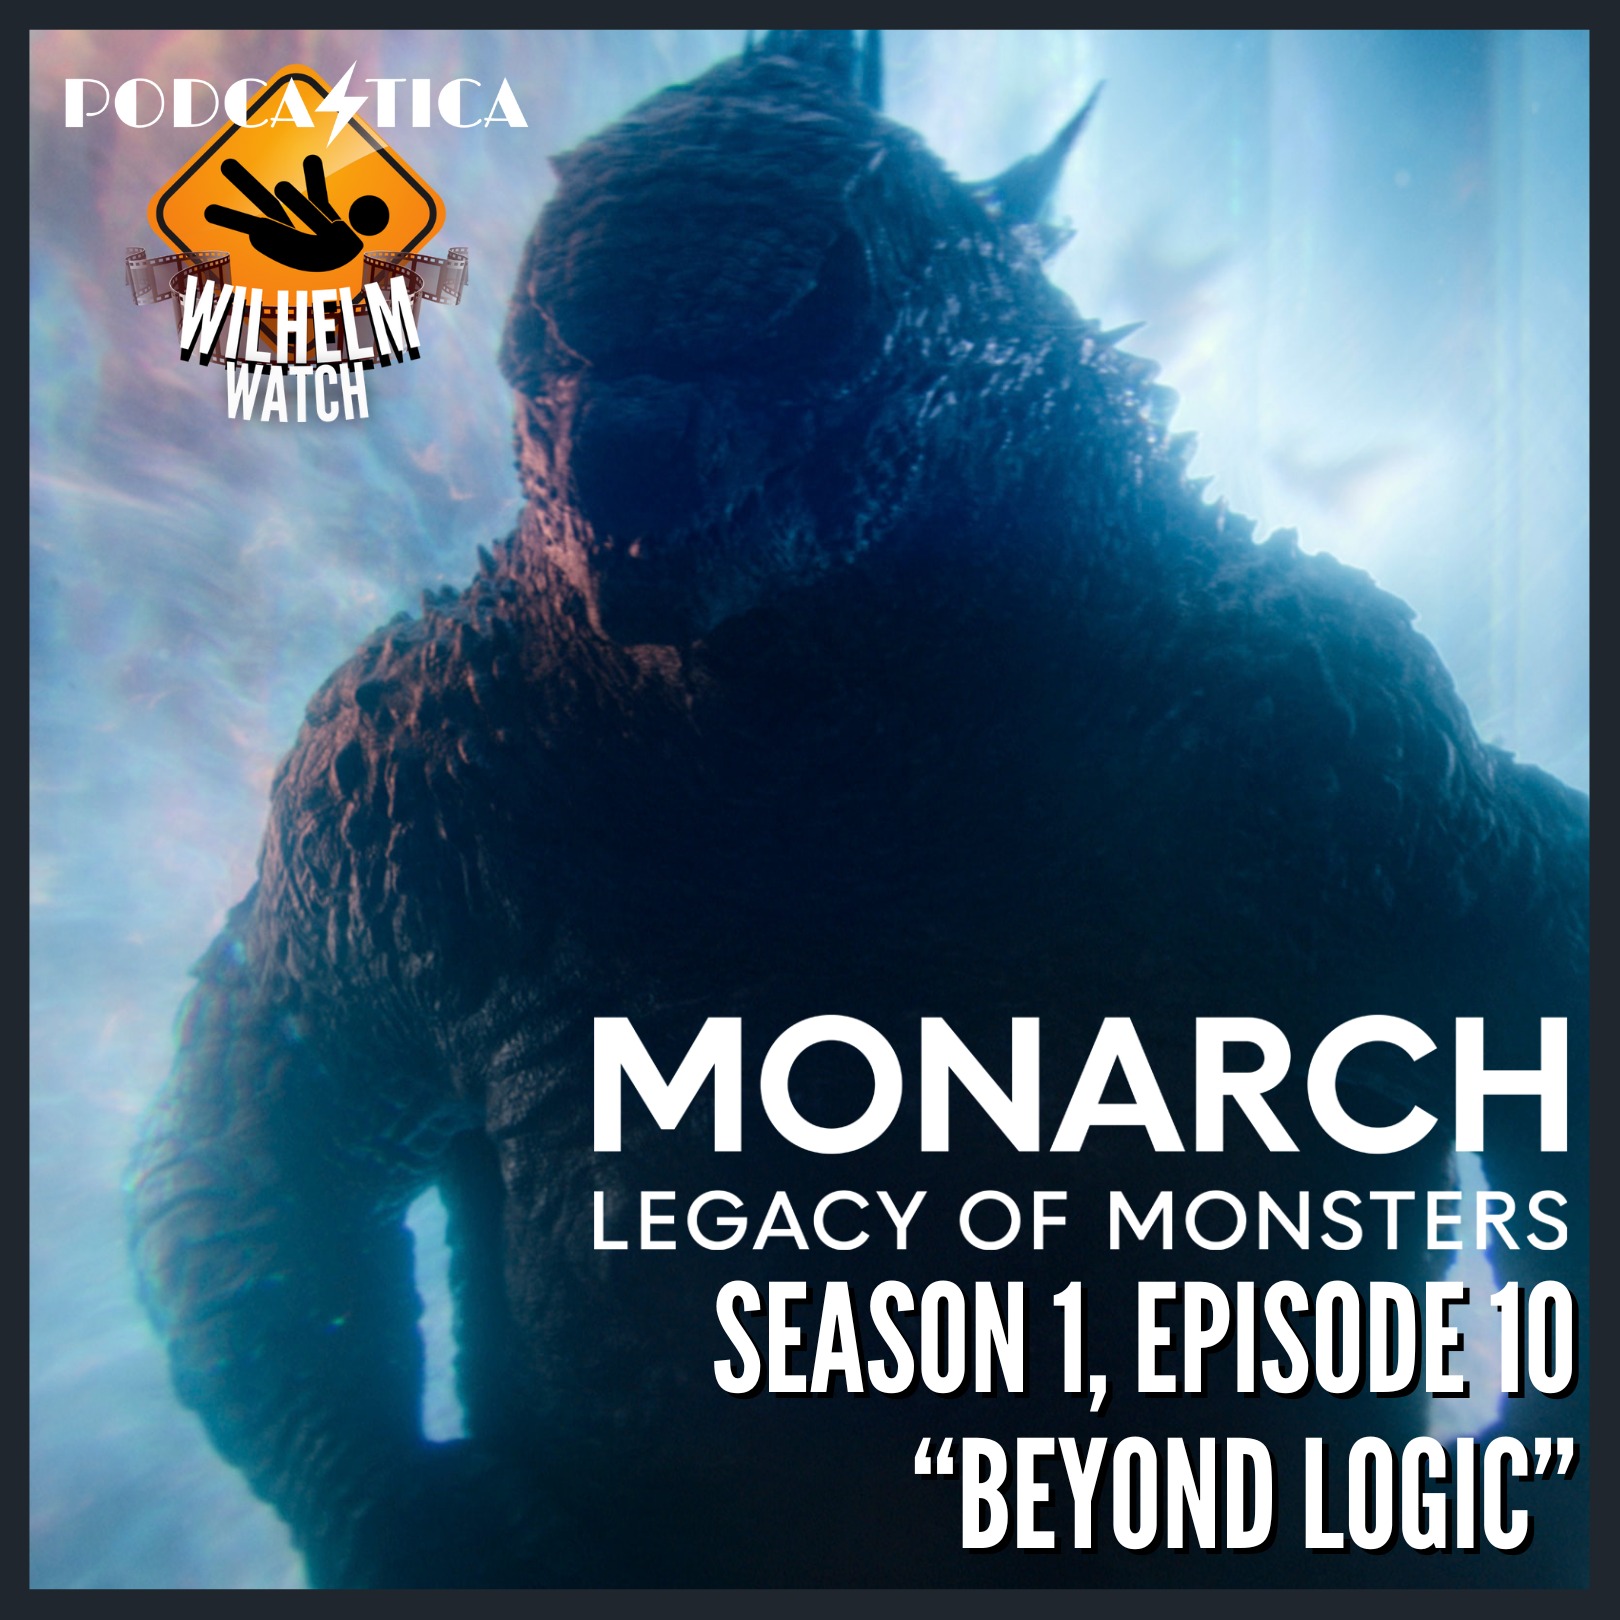 WILHELM WATCH / HOUSE PODCASTICA - Monarch: Legacy of Monsters S01E10 